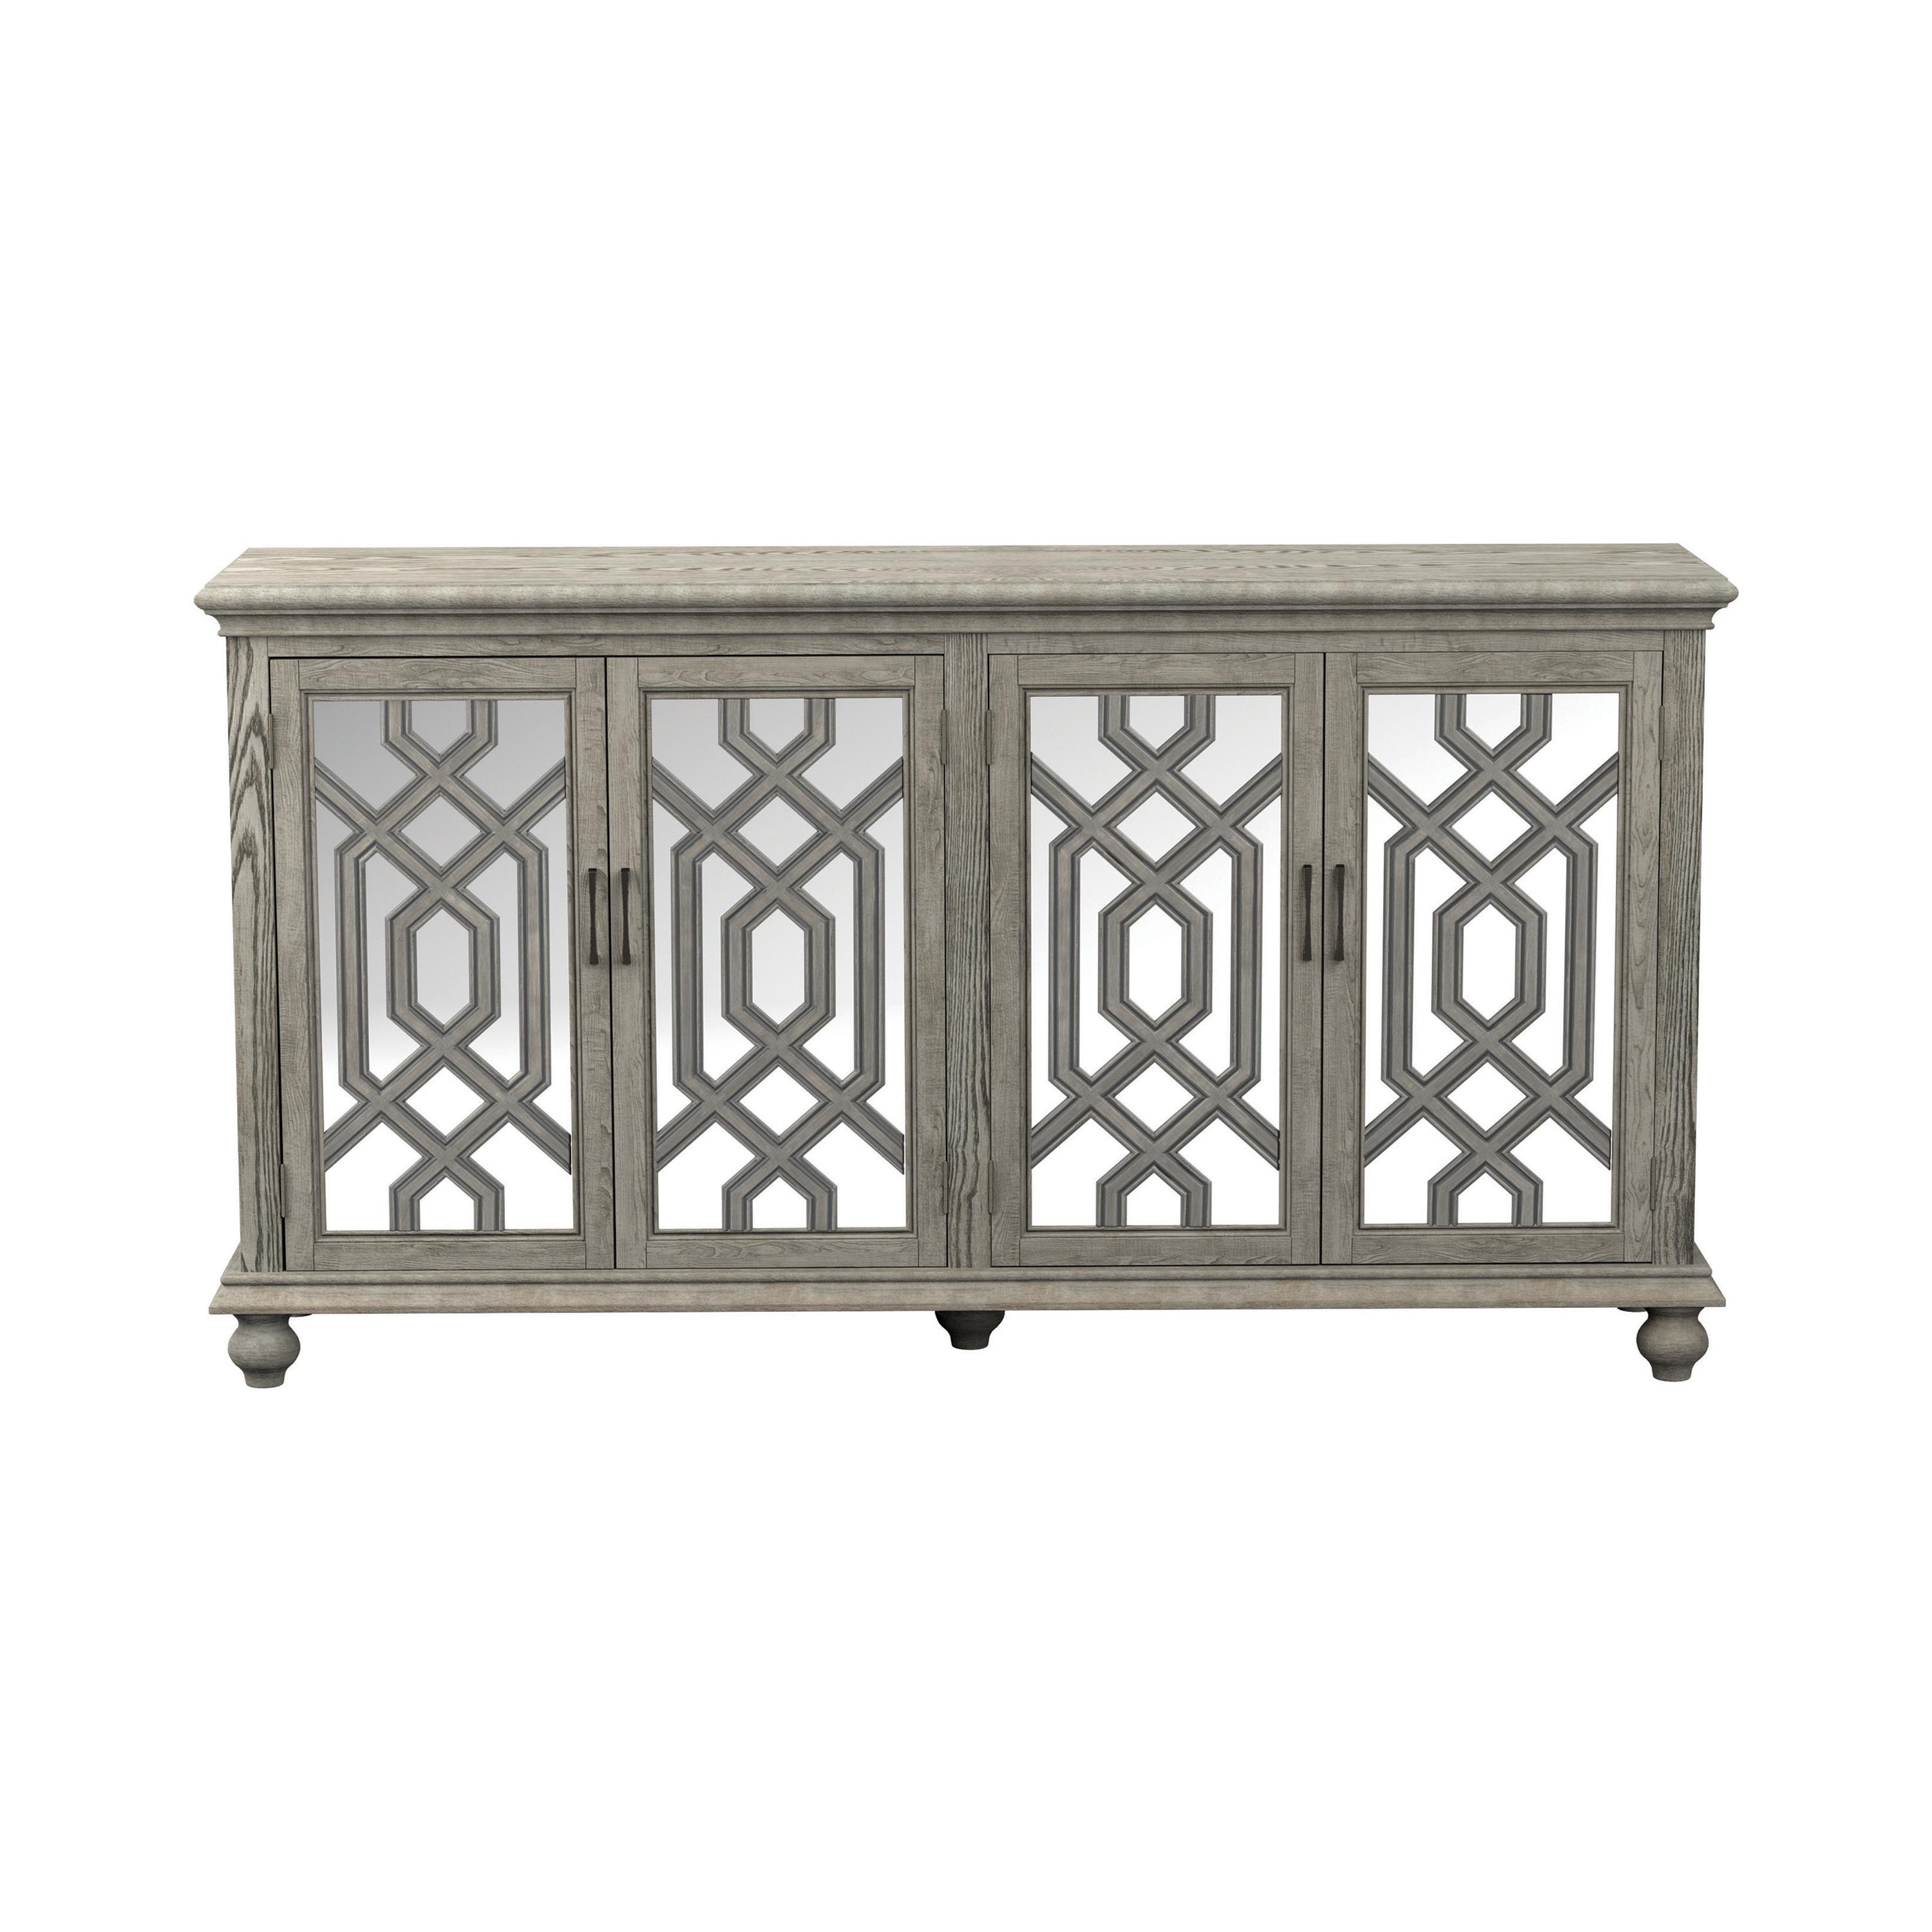 Transitional Accent Cabinet 952845 952845 in Antique White 